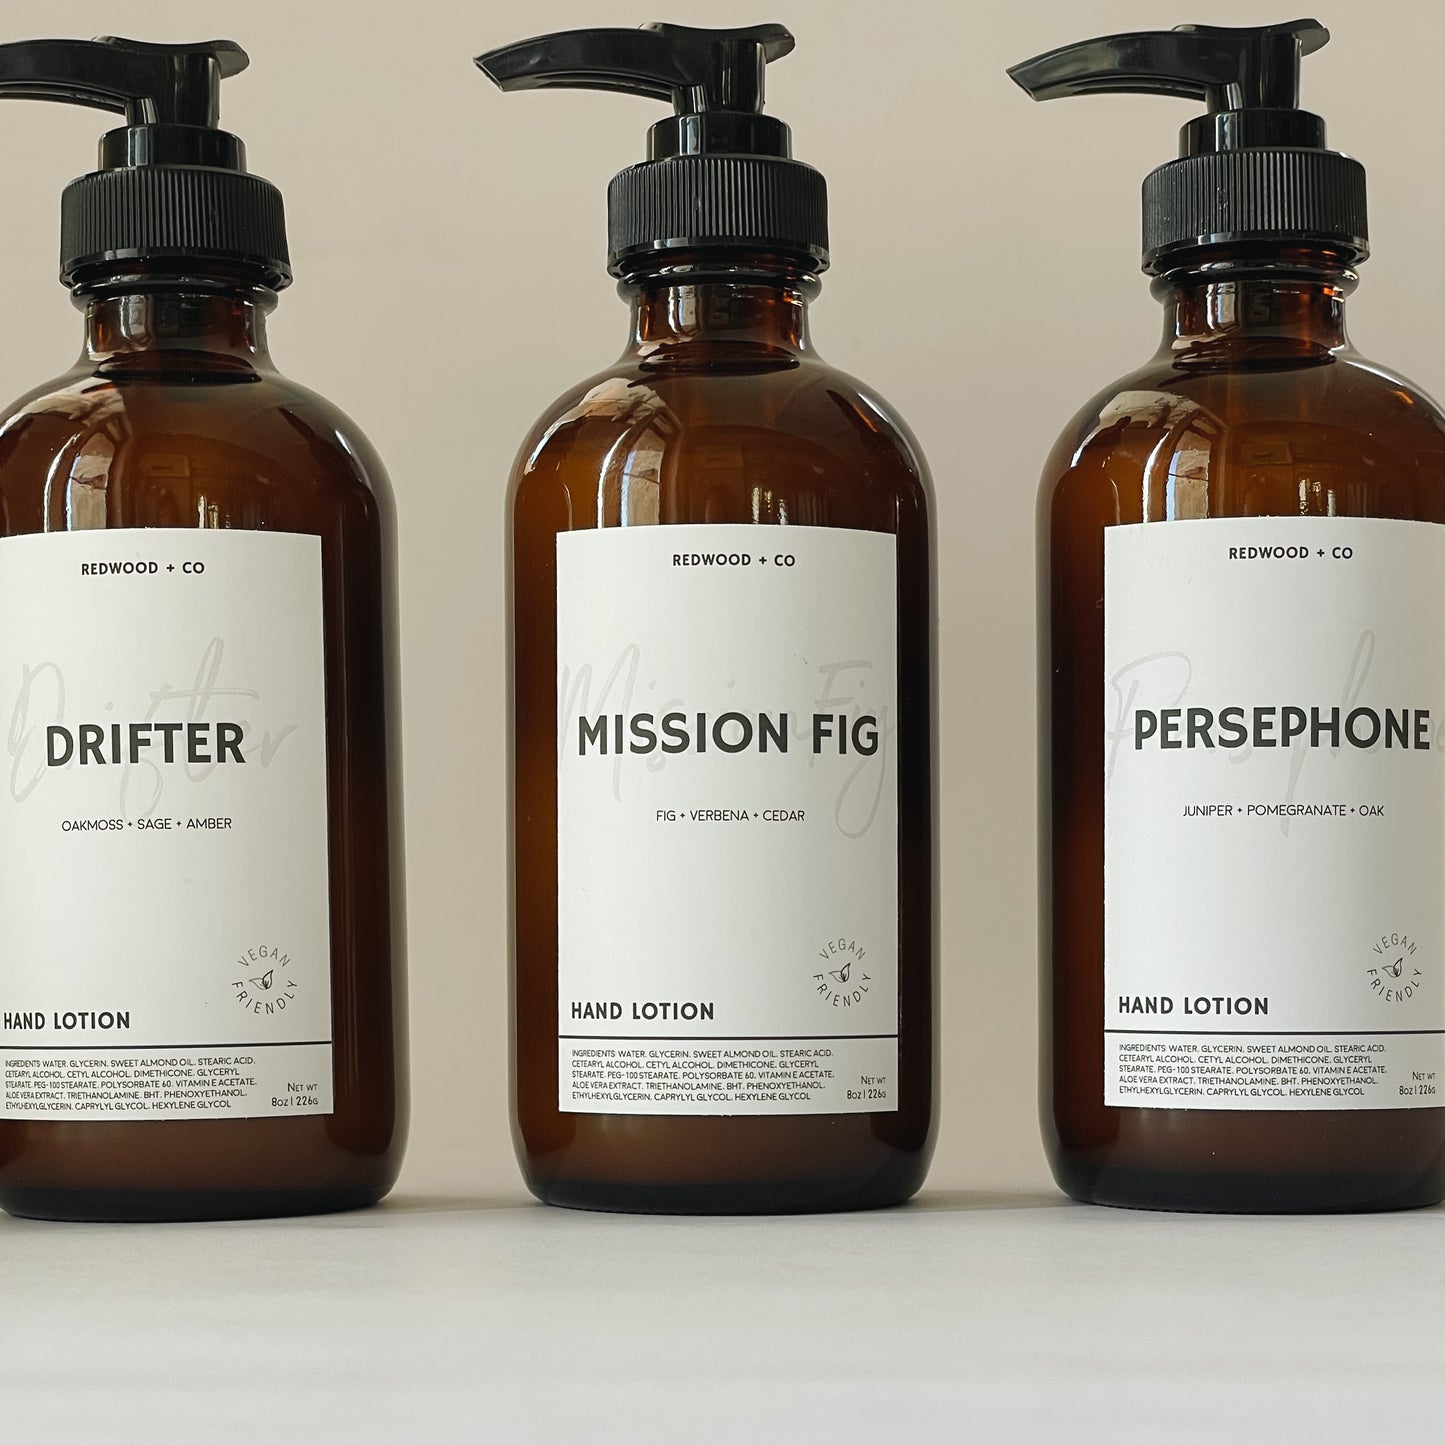 Redwood + Co Natural Hand Lotion | Persephone